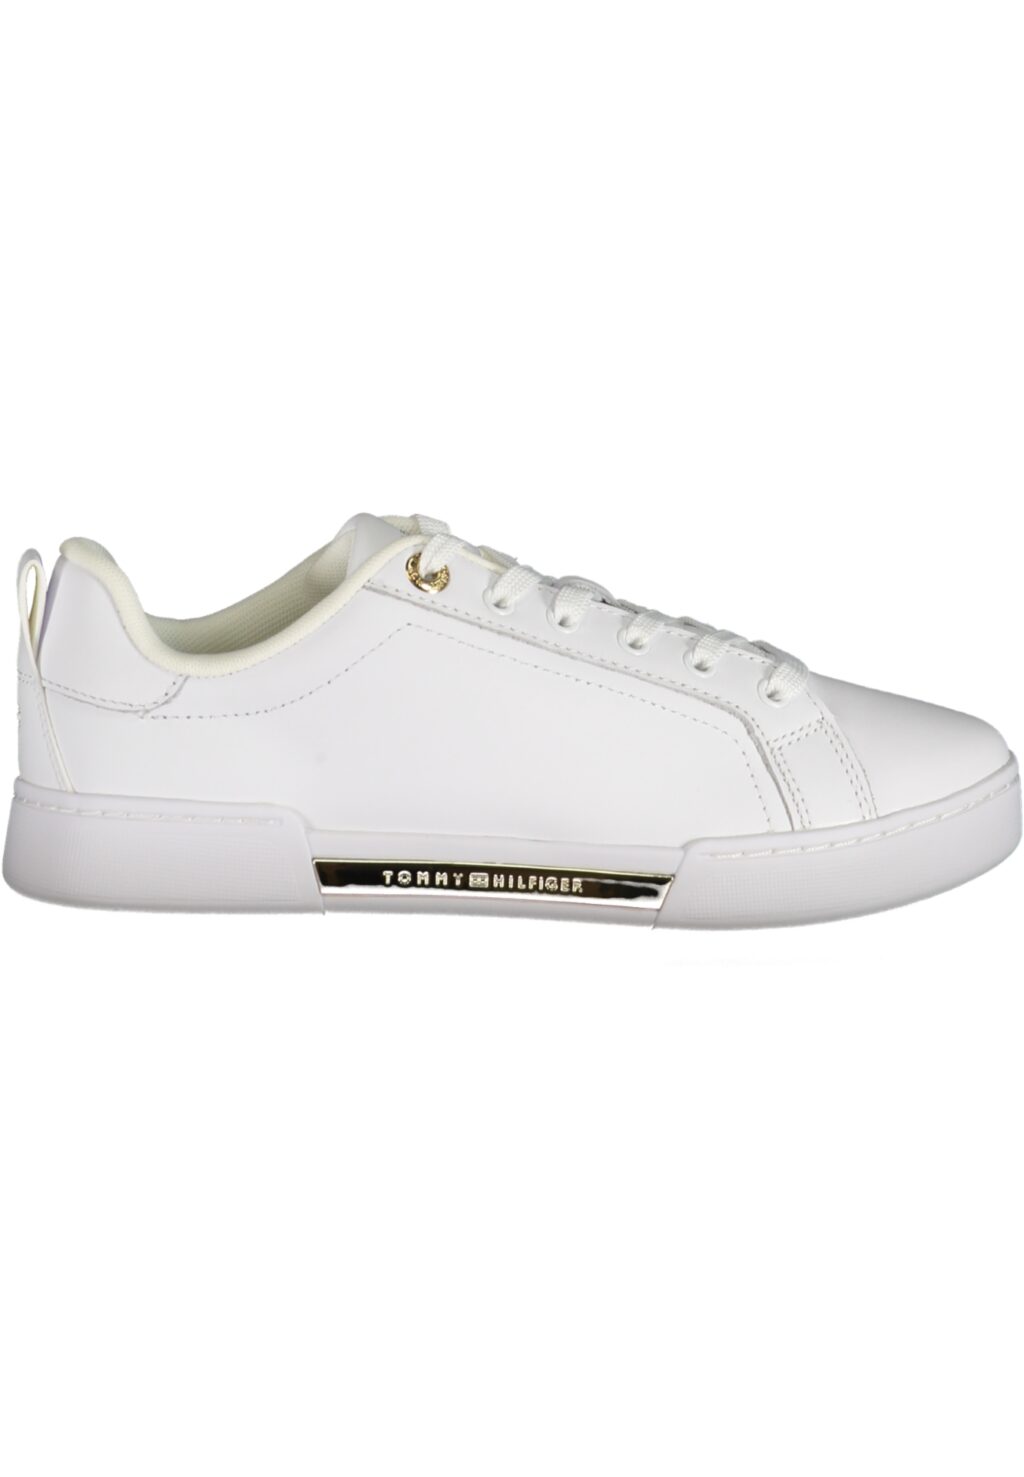 TOMMY HILFIGER WHITE WOMEN'S SPORTS SHOES FW0FW07634F_BIYBS